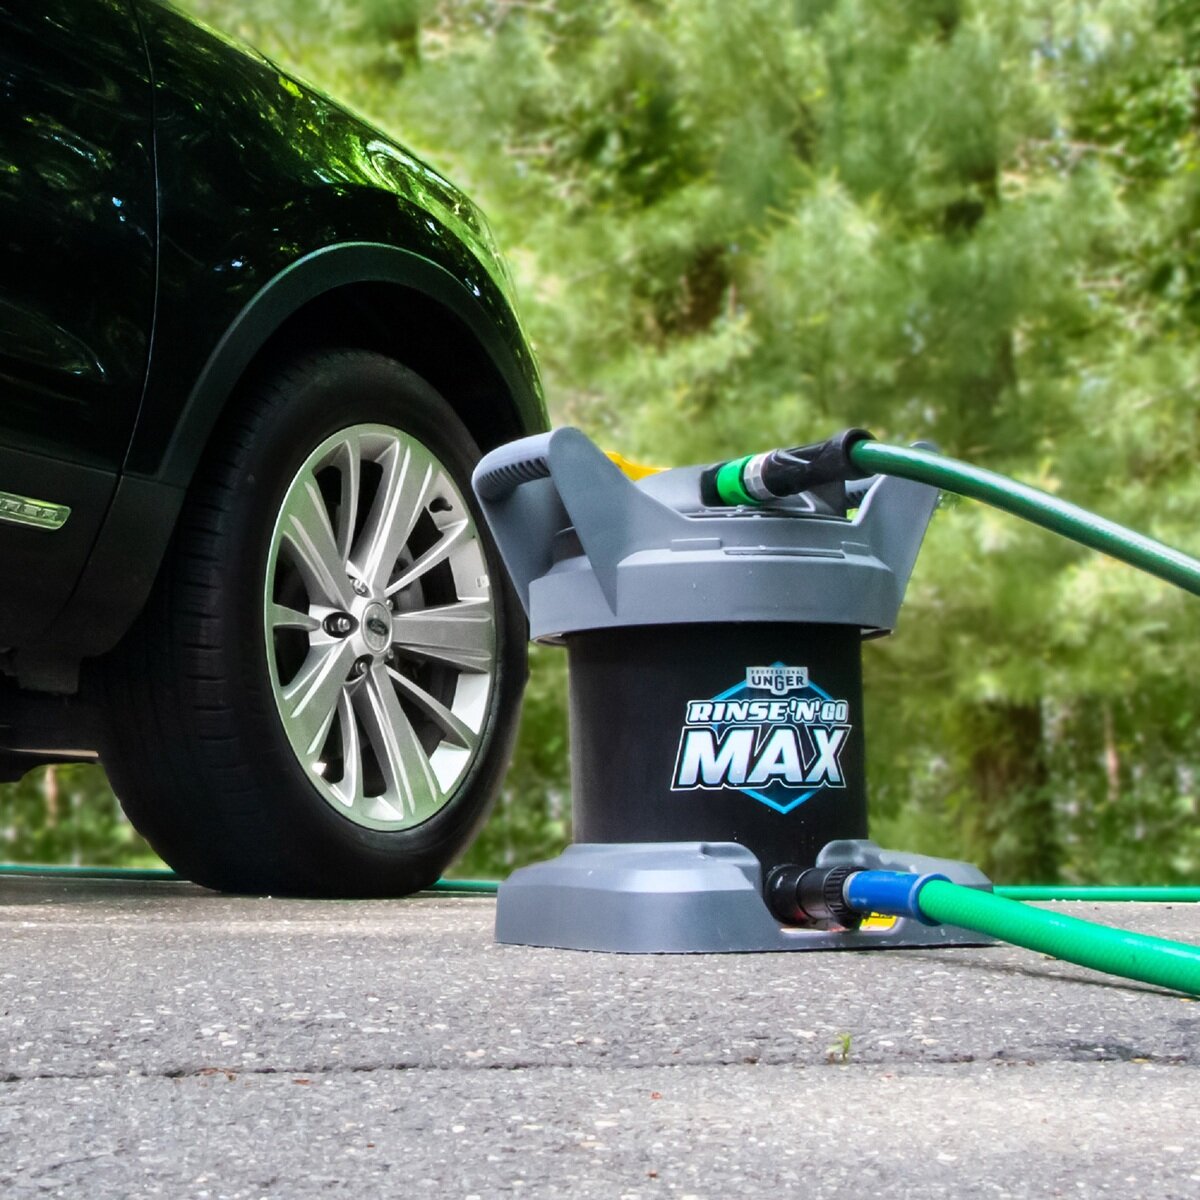 Unger Rinse 'n' Go MAX 洗車用純水器 樹脂フィルター1個付き | Costco 